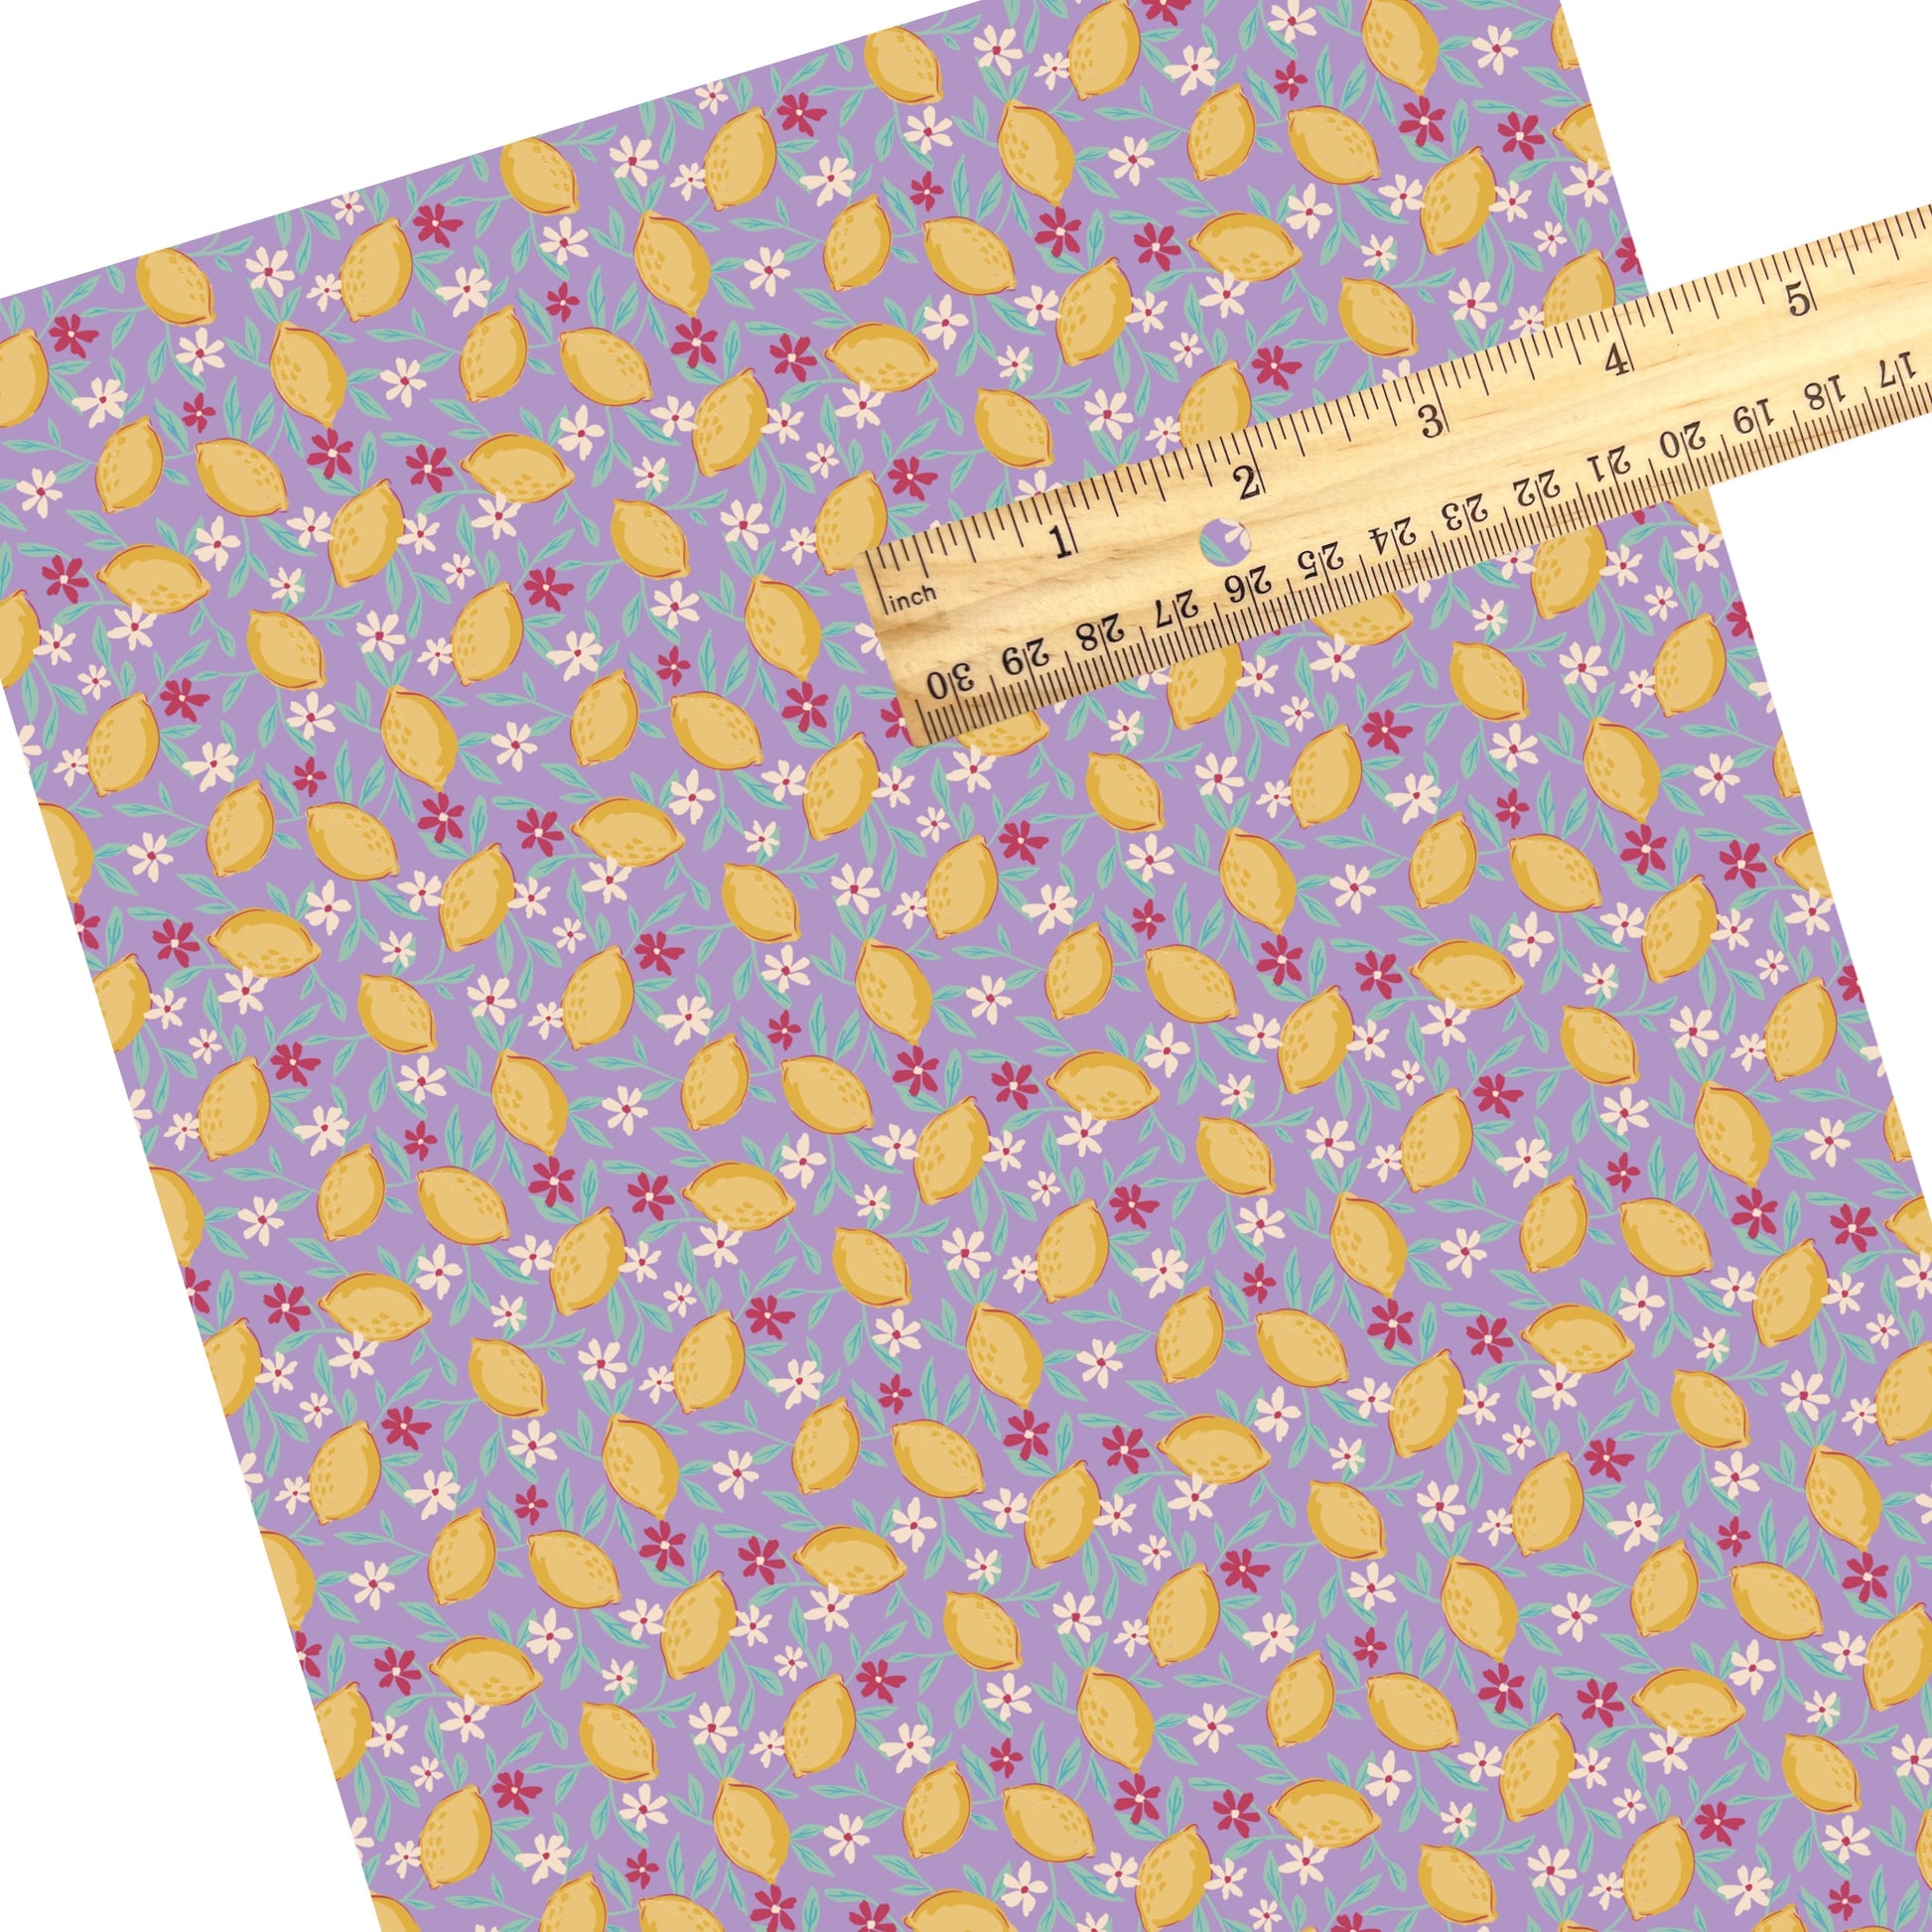 These summer faux leather sheets contain the following design elements: lemons surrounded by tiny flowers on purple. Our CPSIA compliant faux leather sheets or rolls can be used for all types of crafting projects.